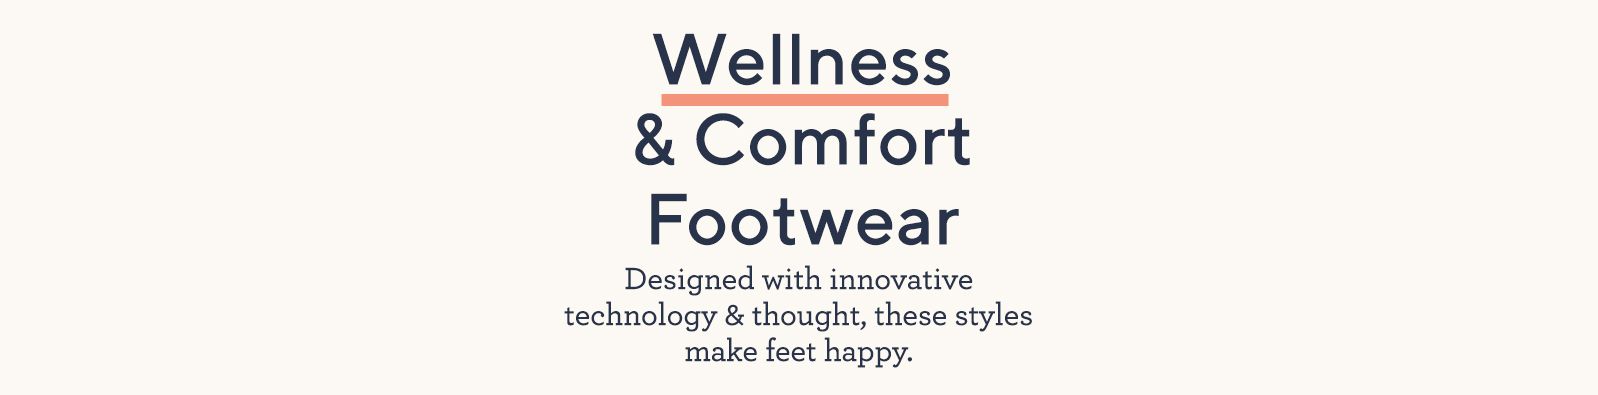 Wellness & Comfort Footwear Designed with innovative technology & thought, these styles make feet happy.